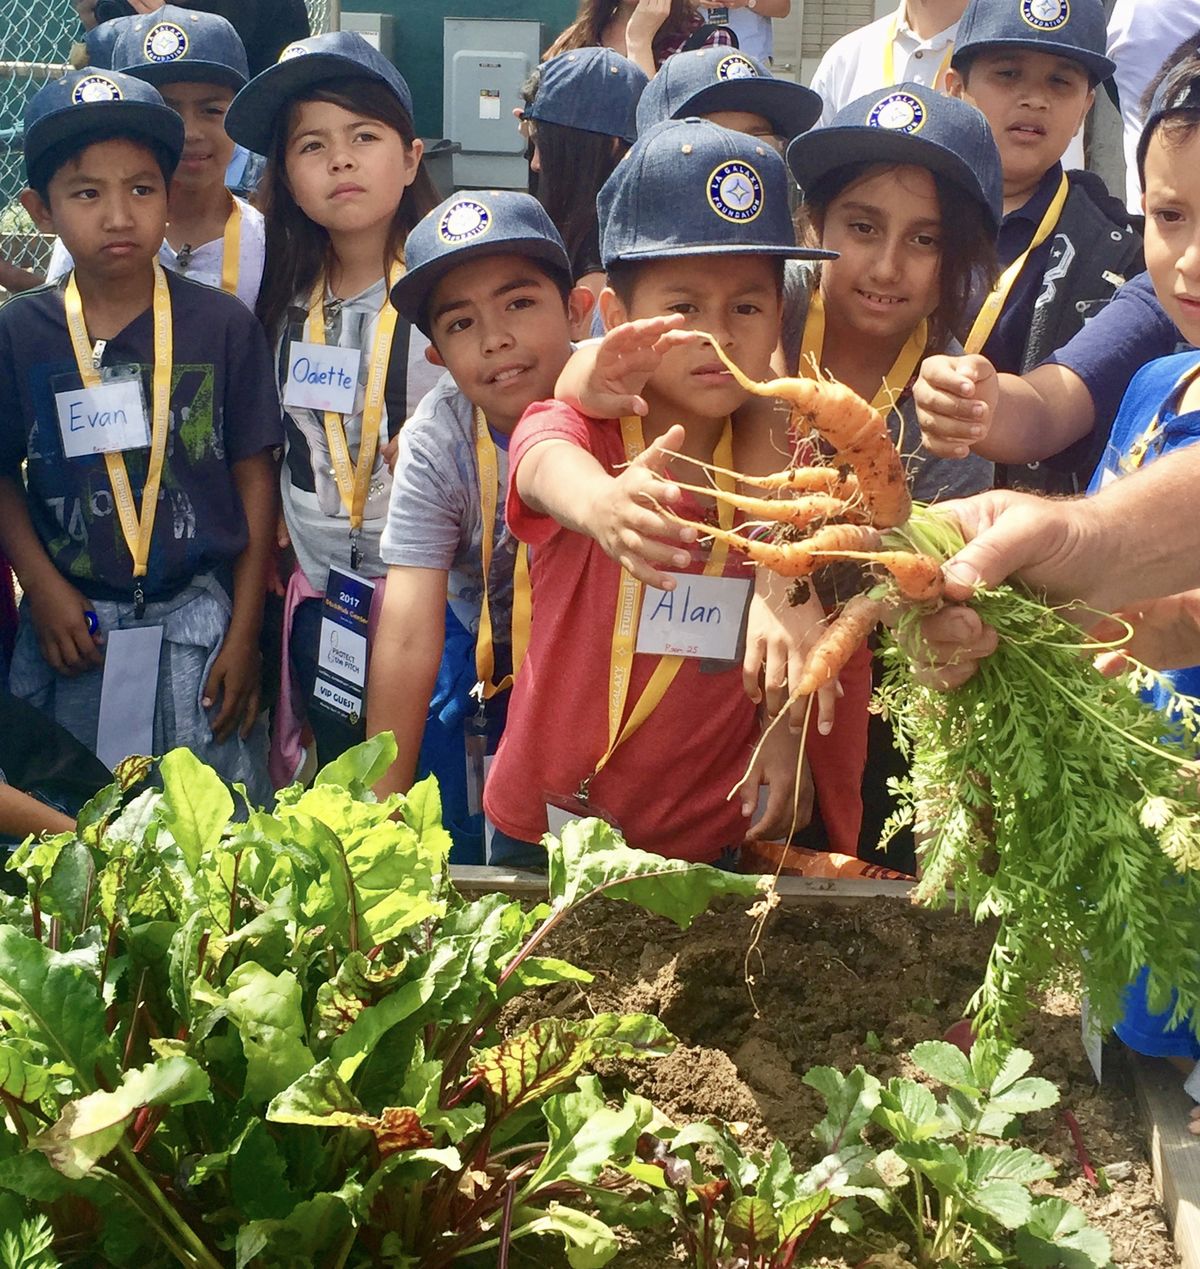 Students from Catskill Avenue Elementary explore StubHub Center’s greenhouse and examine a newly uprooted carrot on April 17, 2017. StubHub Center's greenhouse produces numerous types of vegetables to provide food for tenants at the stadium.